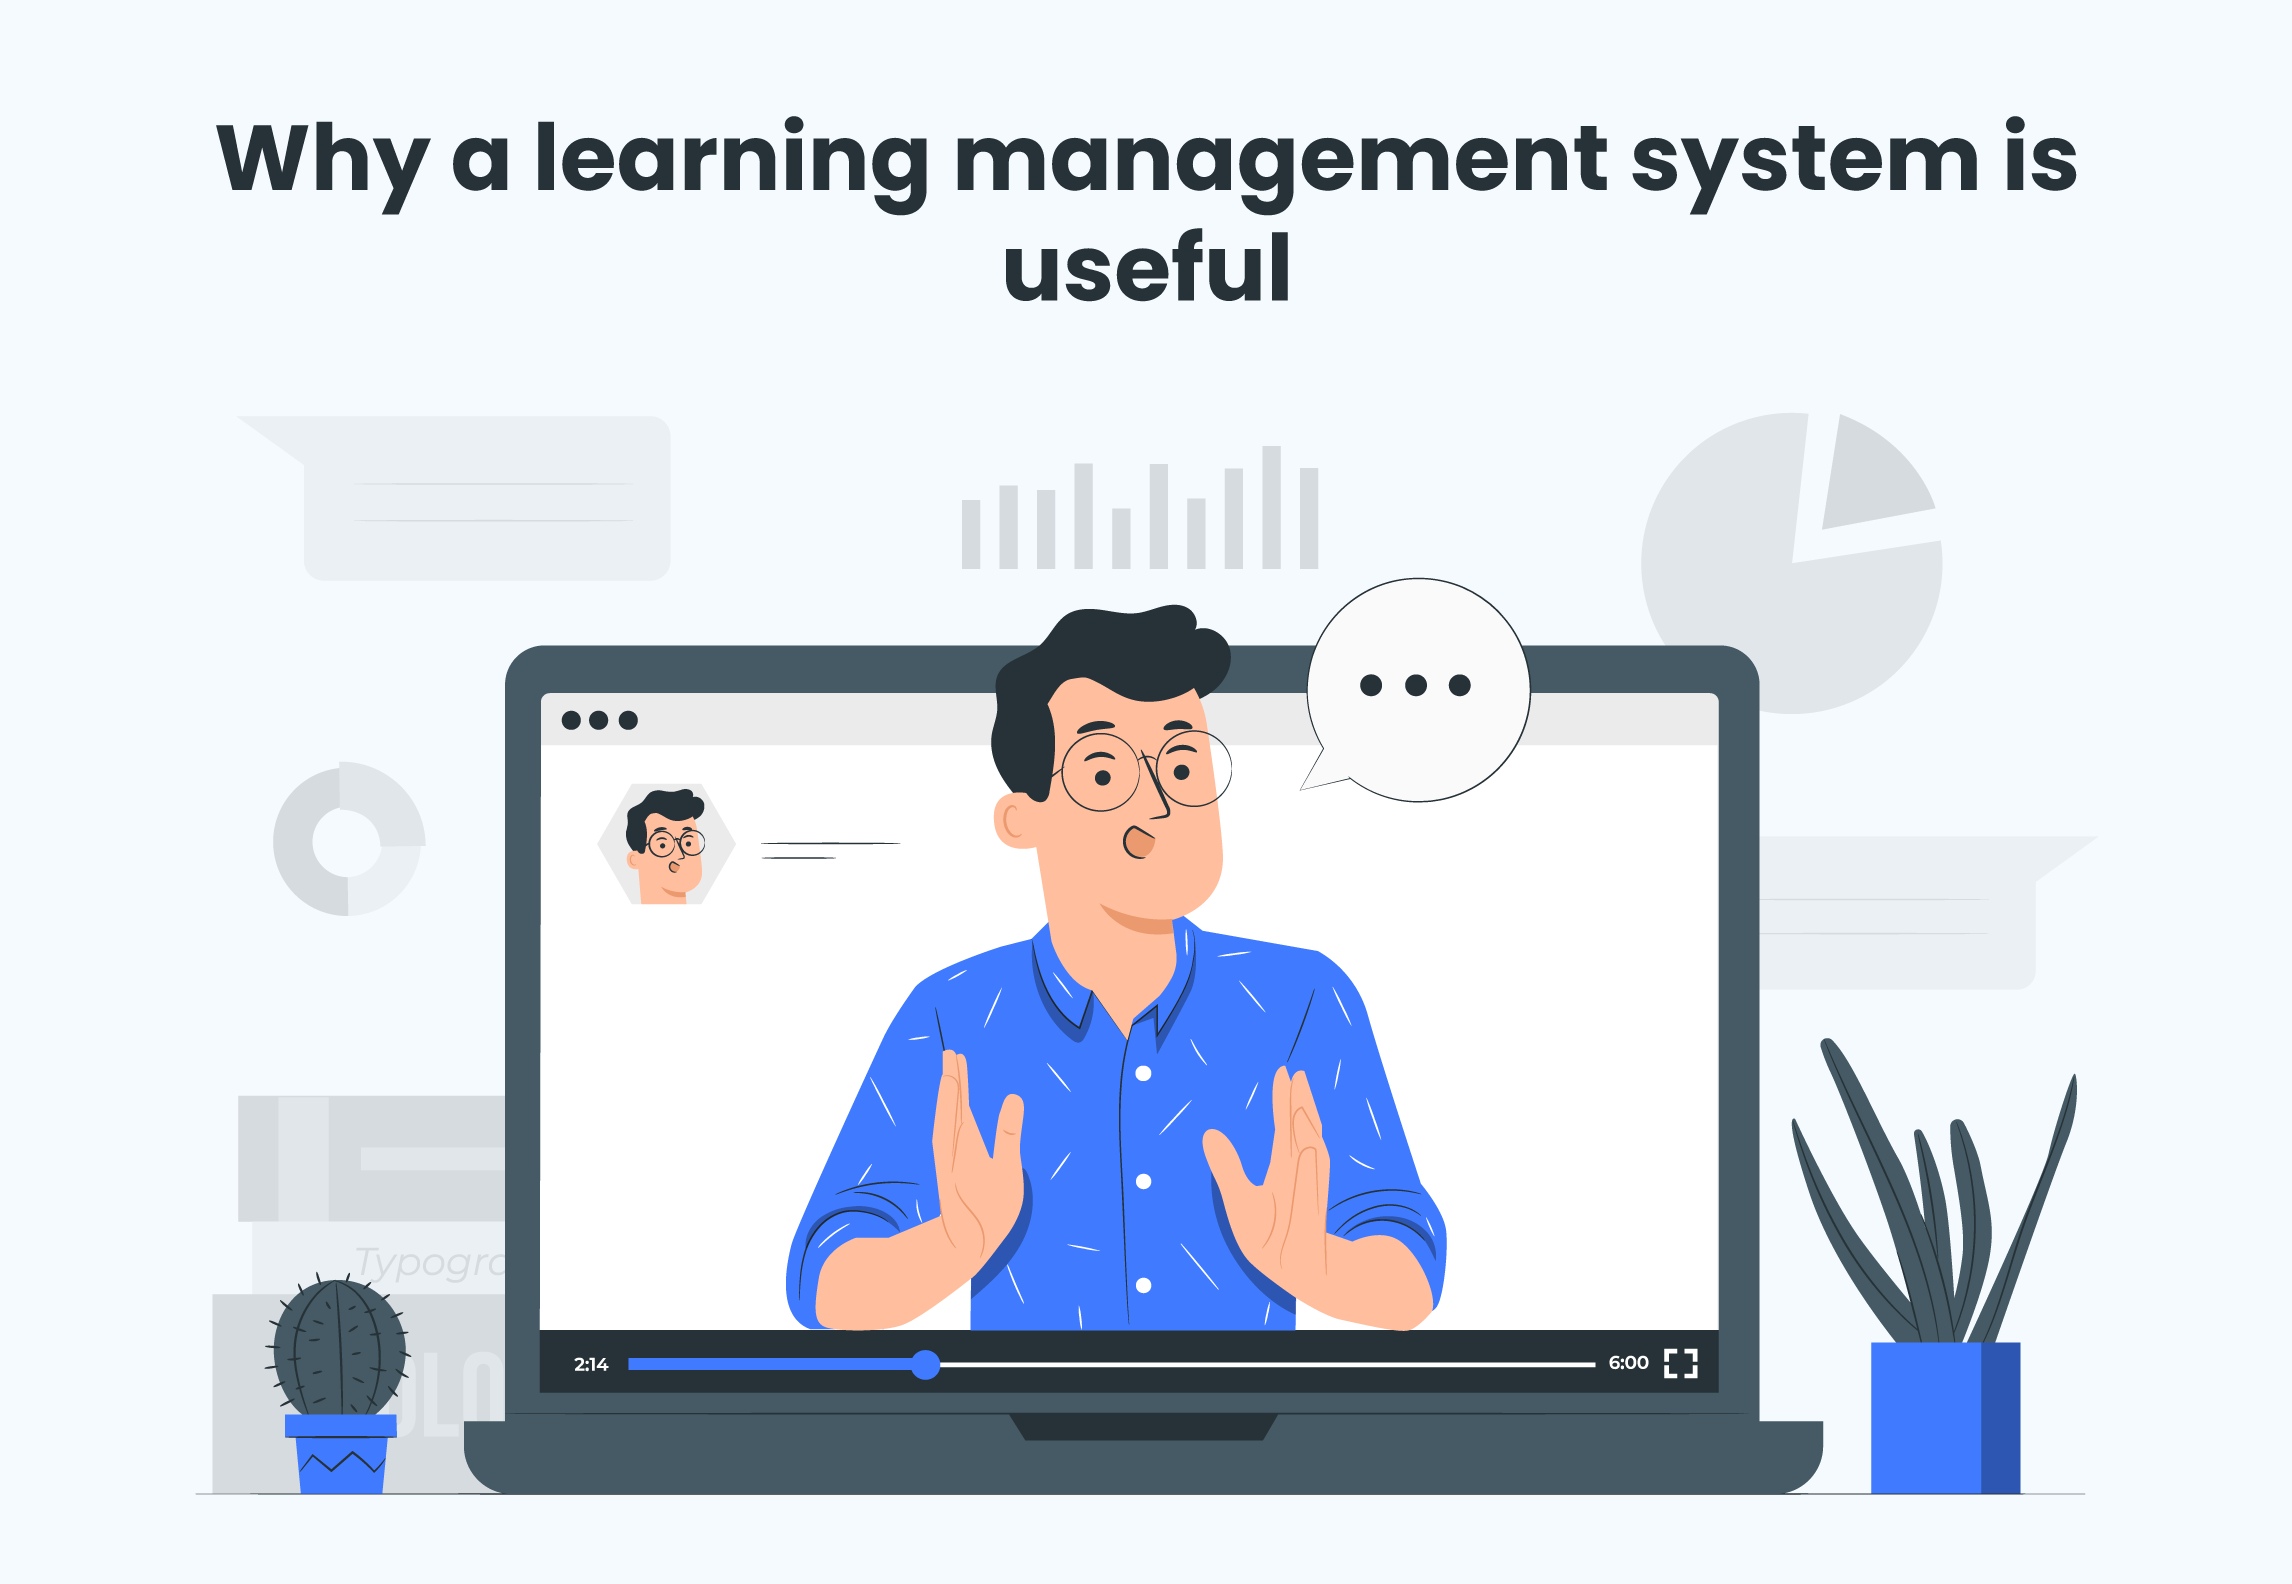 Why Is Learning Management Useful?